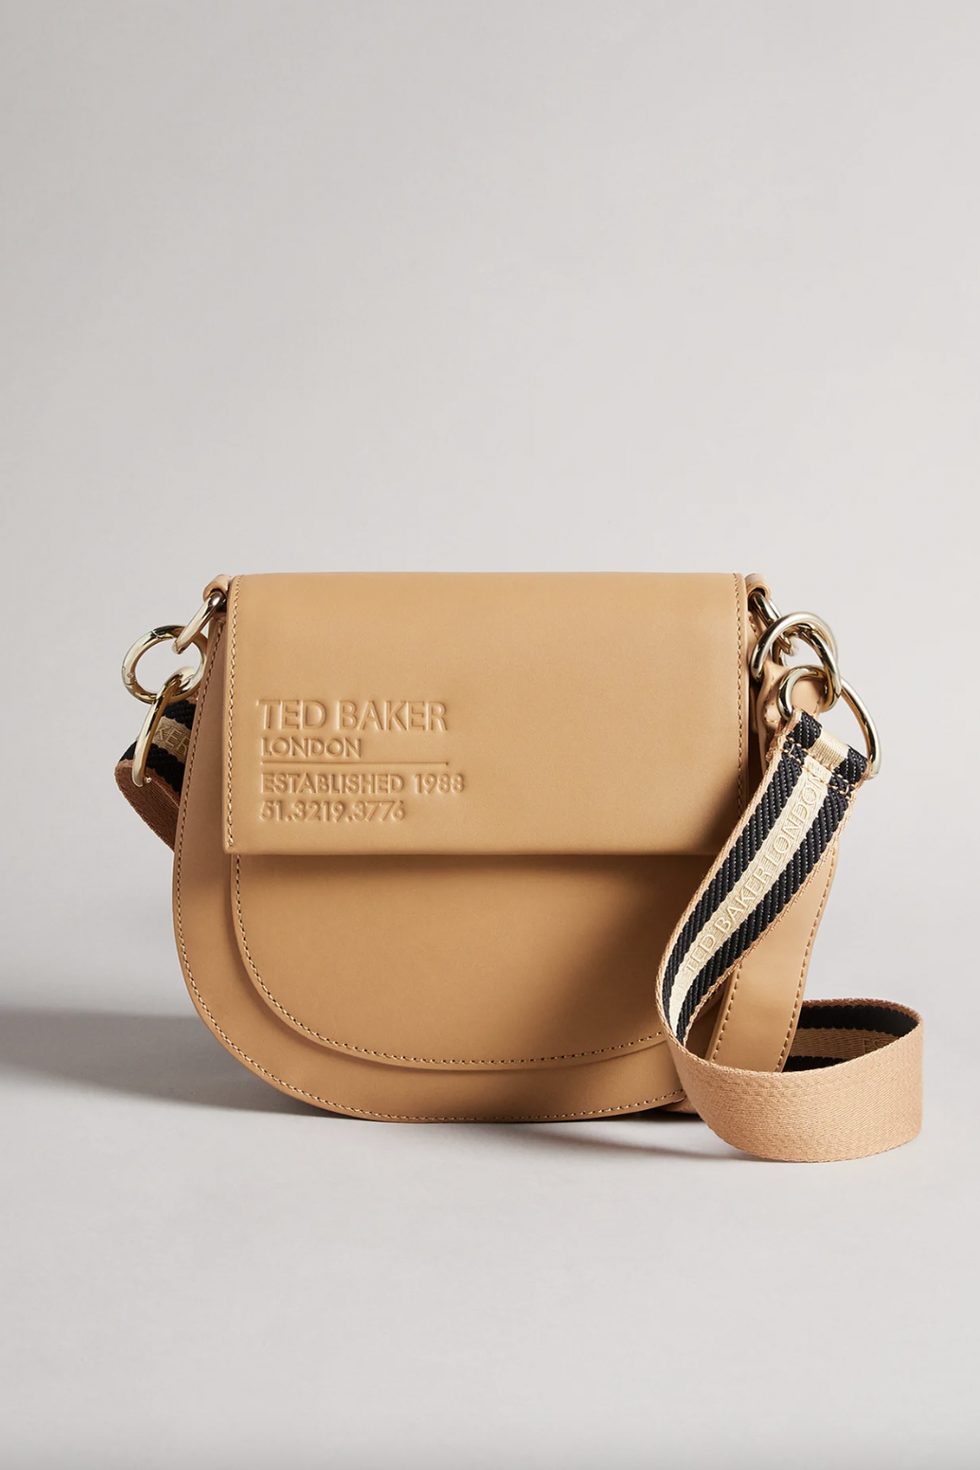 Ted Baker Tan Leather Crossbody Flap Gold Hardware Stitch detail Bag